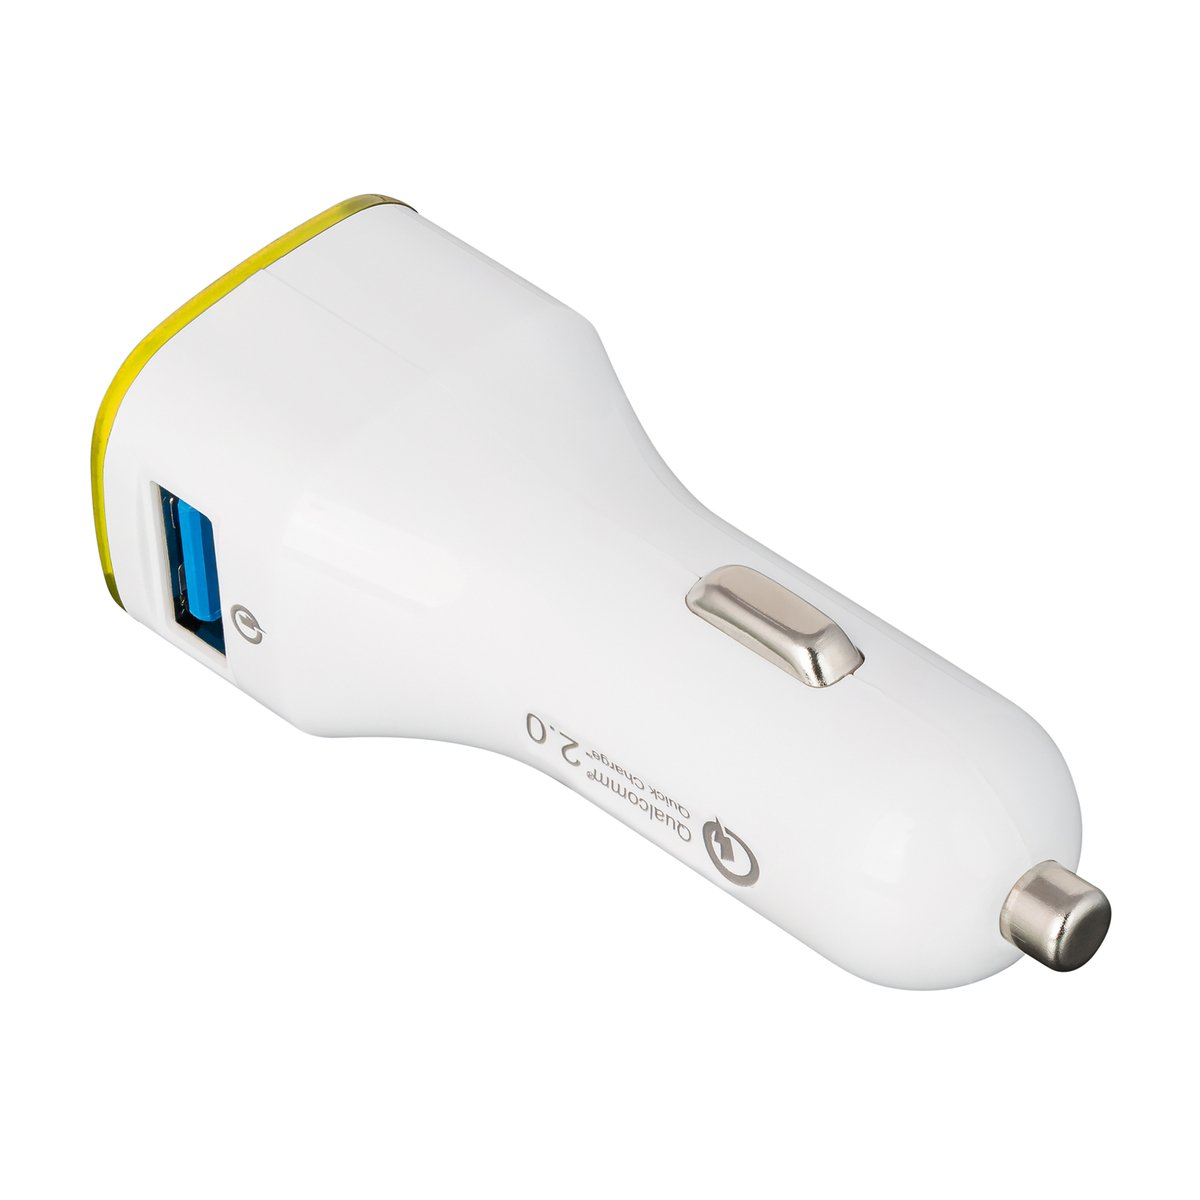 Chargeur voiture USB Quick Charge 2.0® COLLECTION 500 jaune